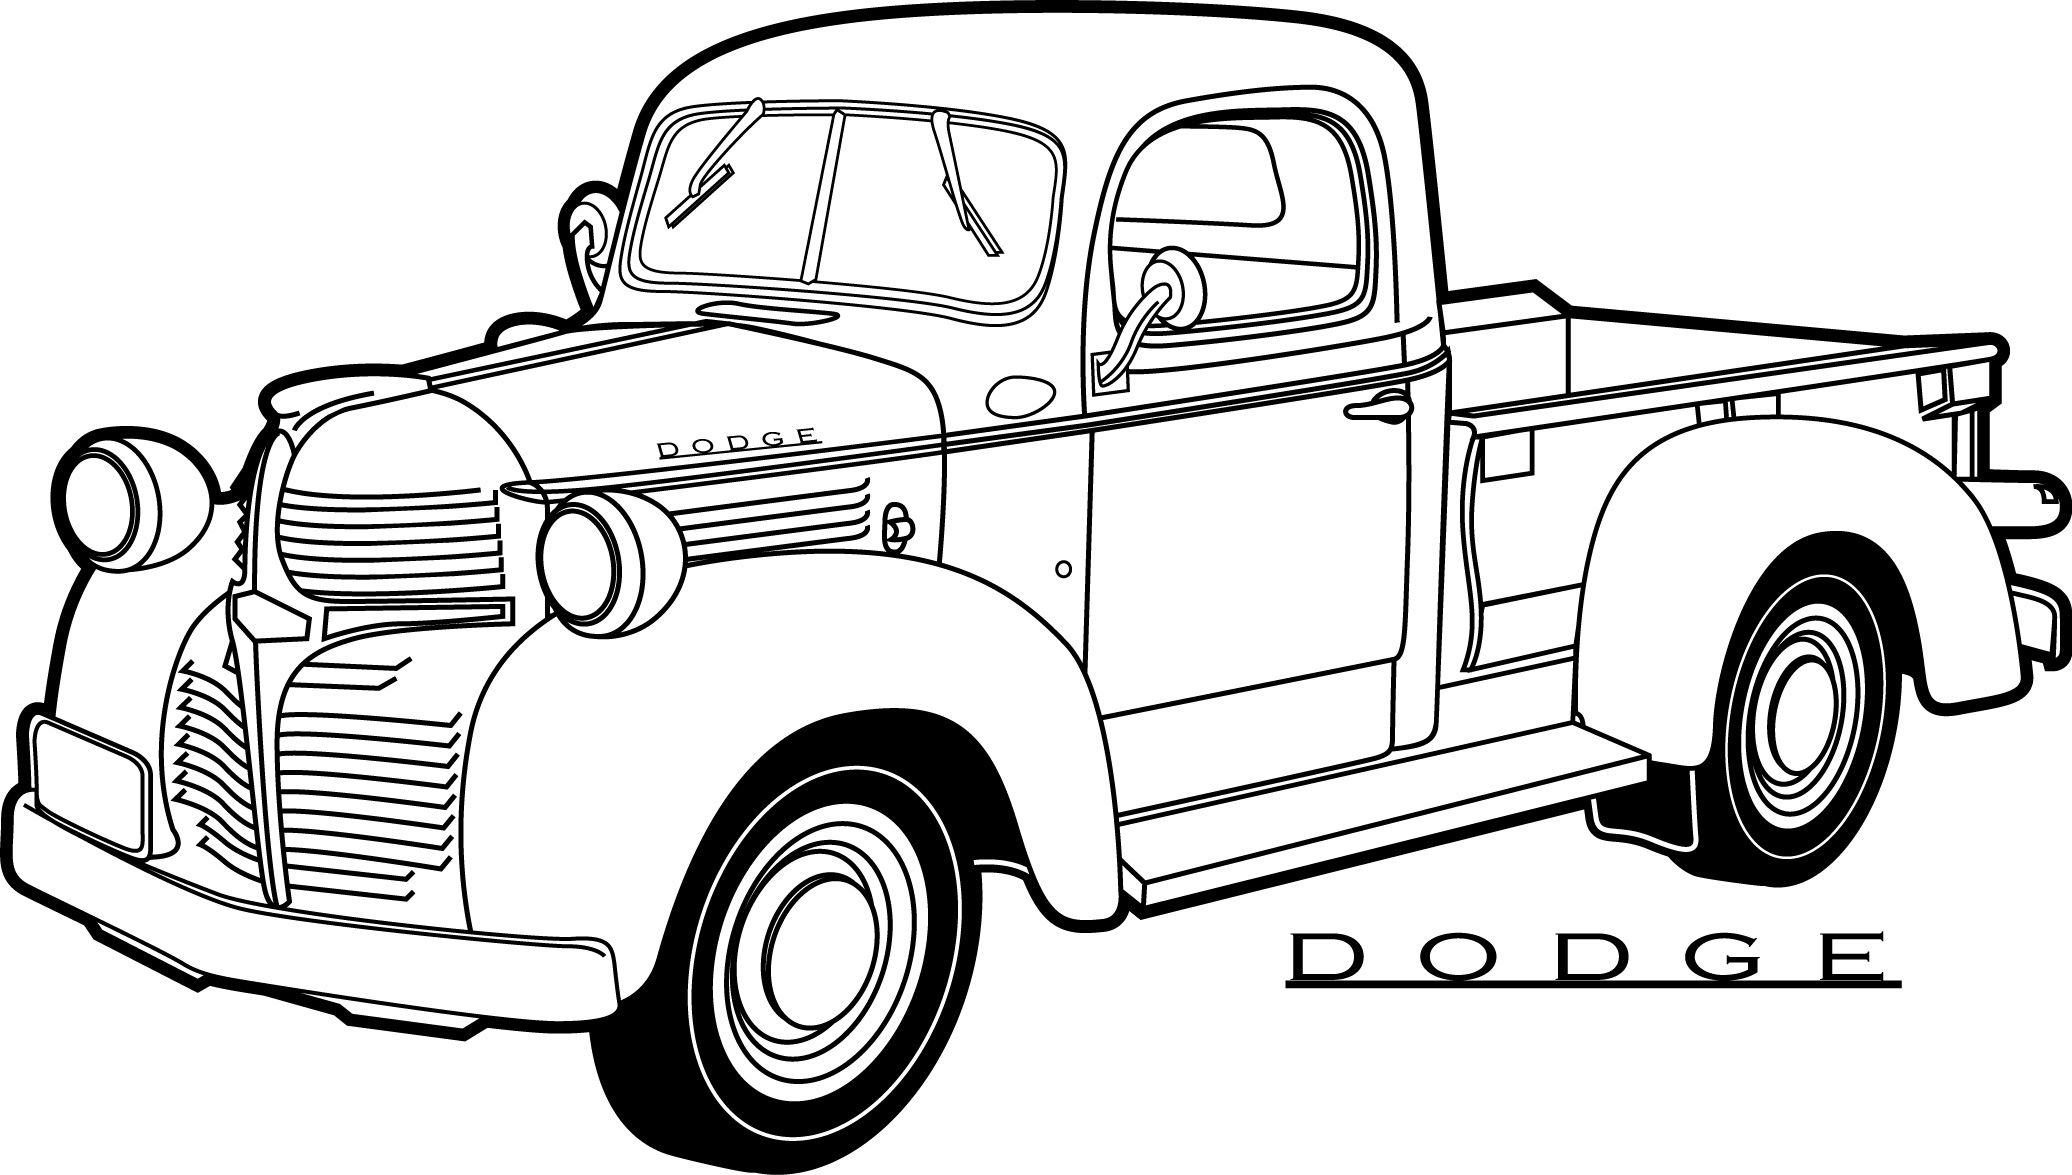 Chevy Truck Coloring Pages Home Ram Semi To Print Free Monster Thomas The  Train – Approachingtheelephant